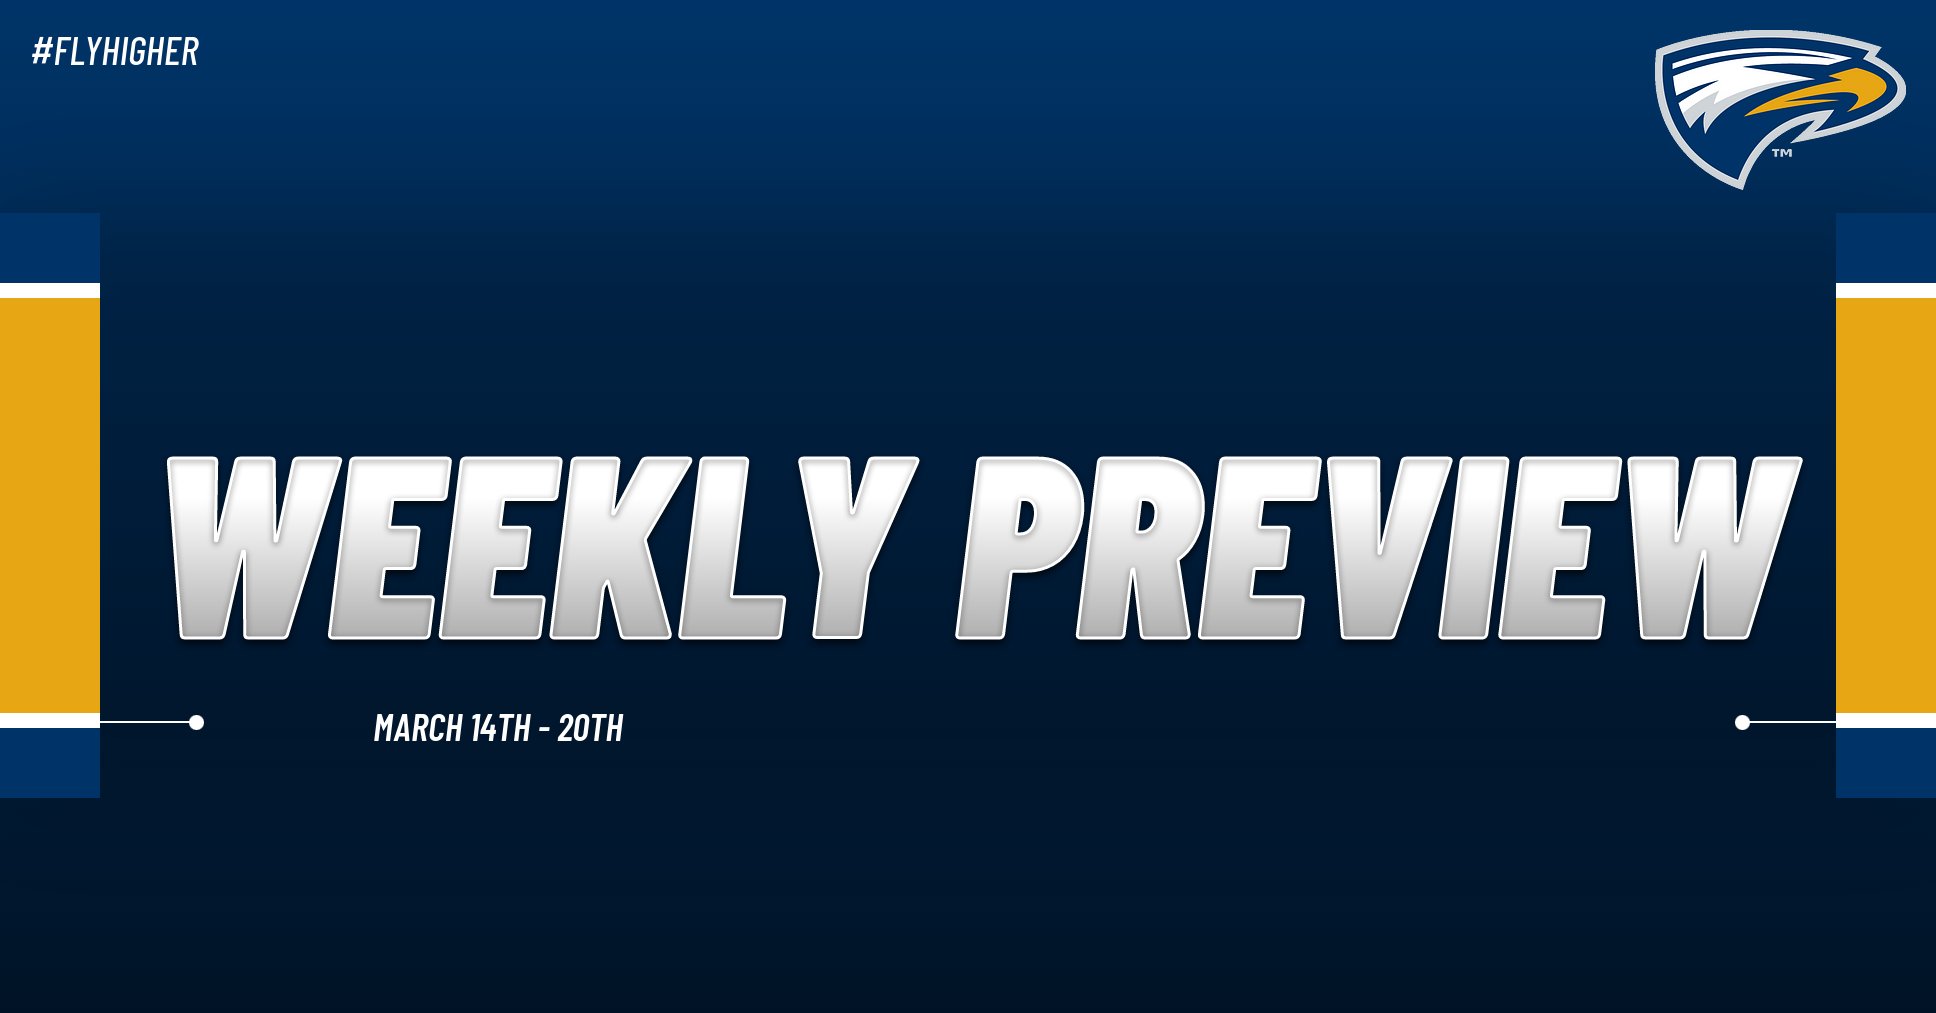 Emory Athletics Weekly Preview - March 14th - 20th